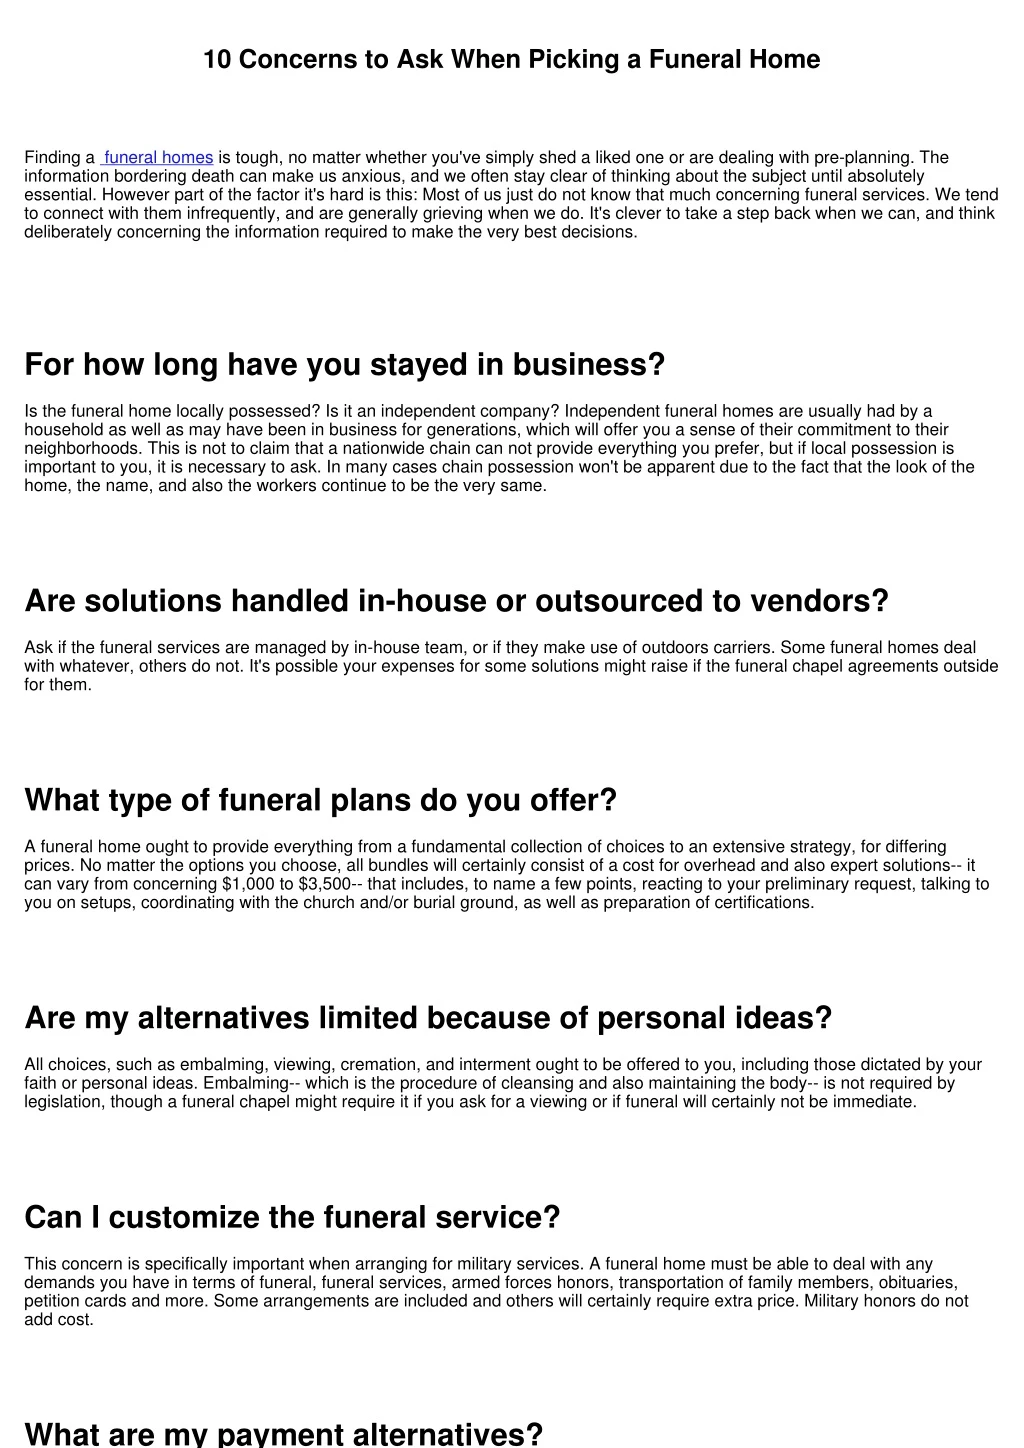 10 concerns to ask when picking a funeral home